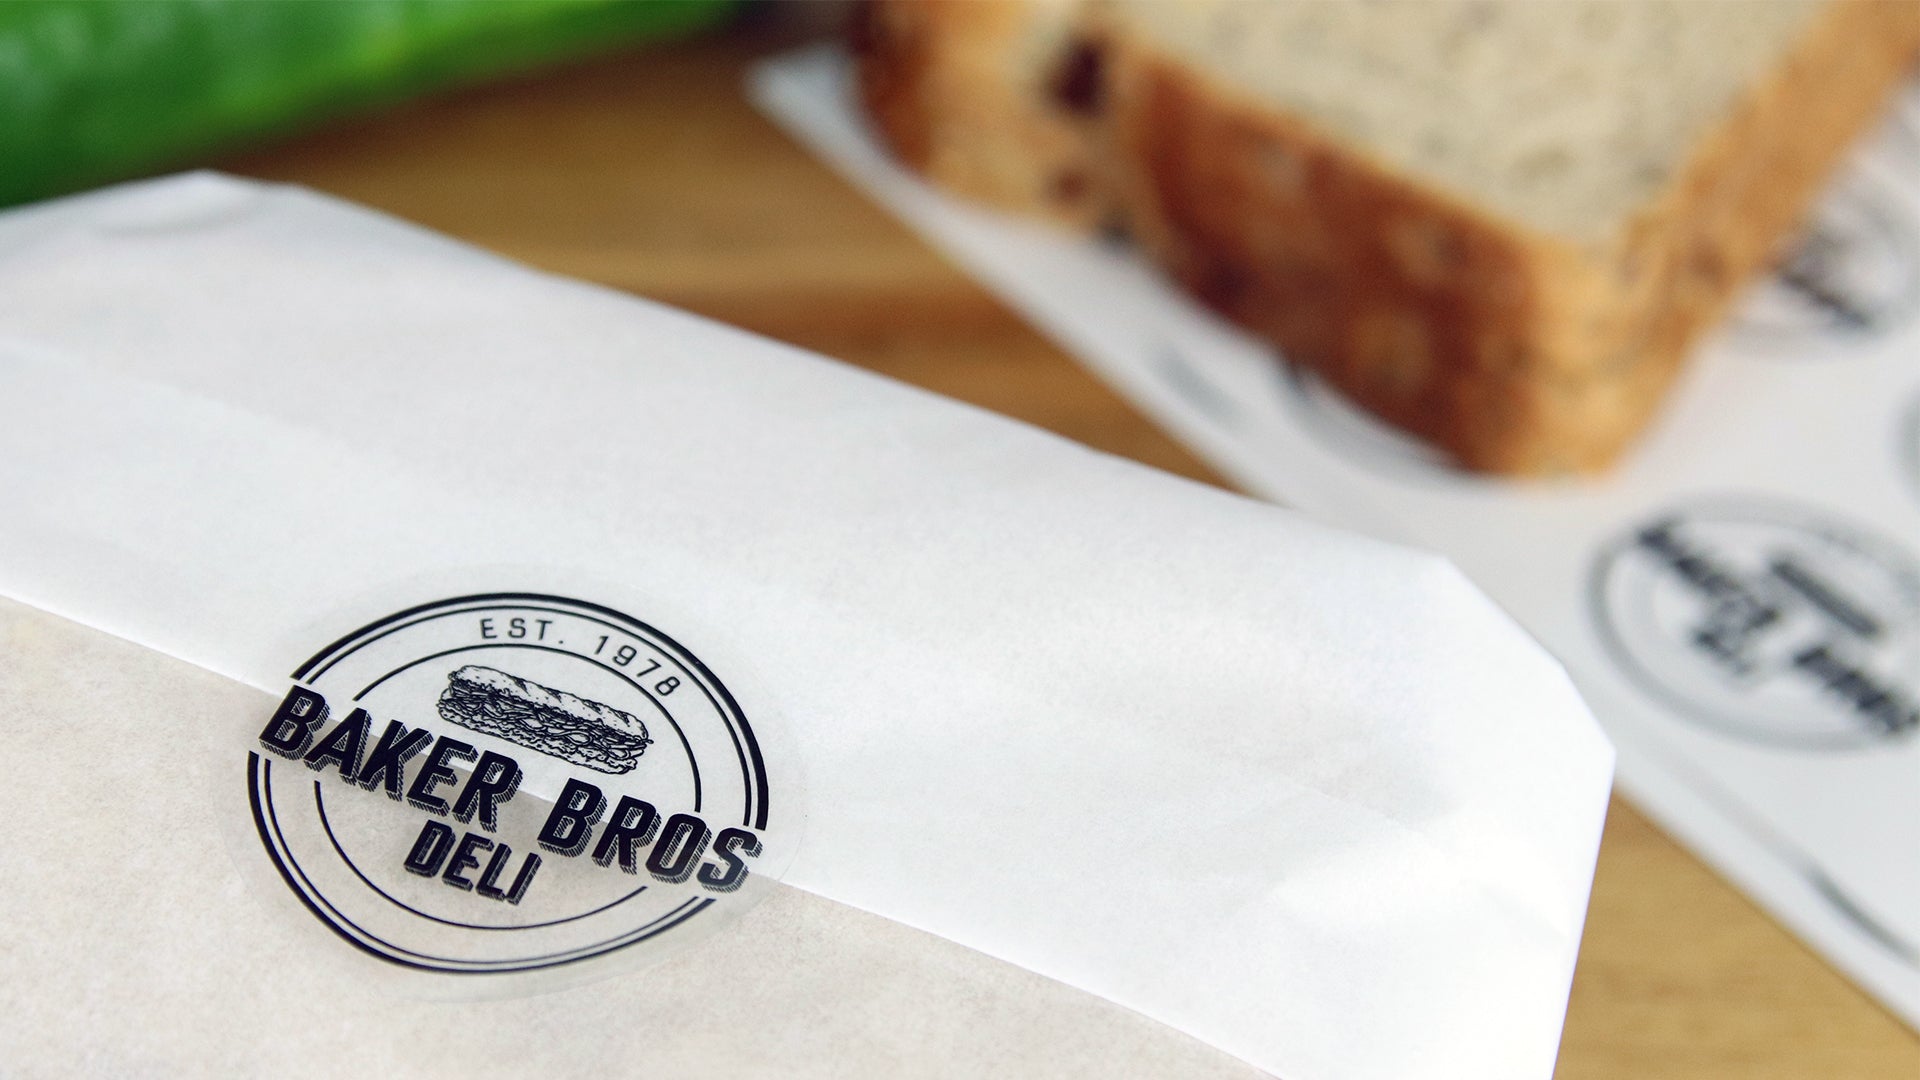 Clear logo sticker with baker bros logo applied to seal a sandwich wrapper